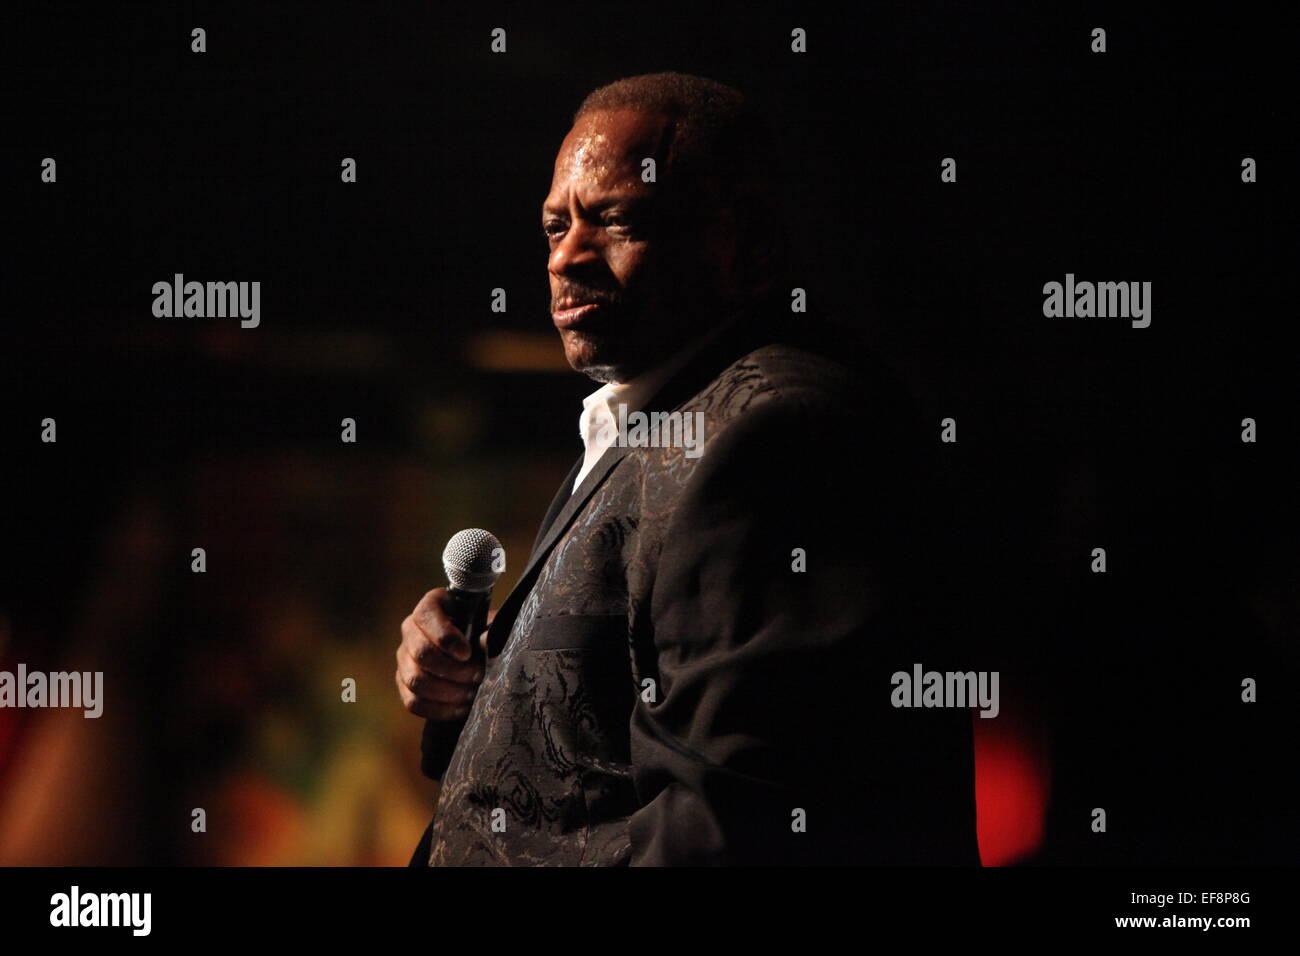 B B King Bar And Grill Presents The Music Of Alexander O Neal Featuring Alexander O Neal Where